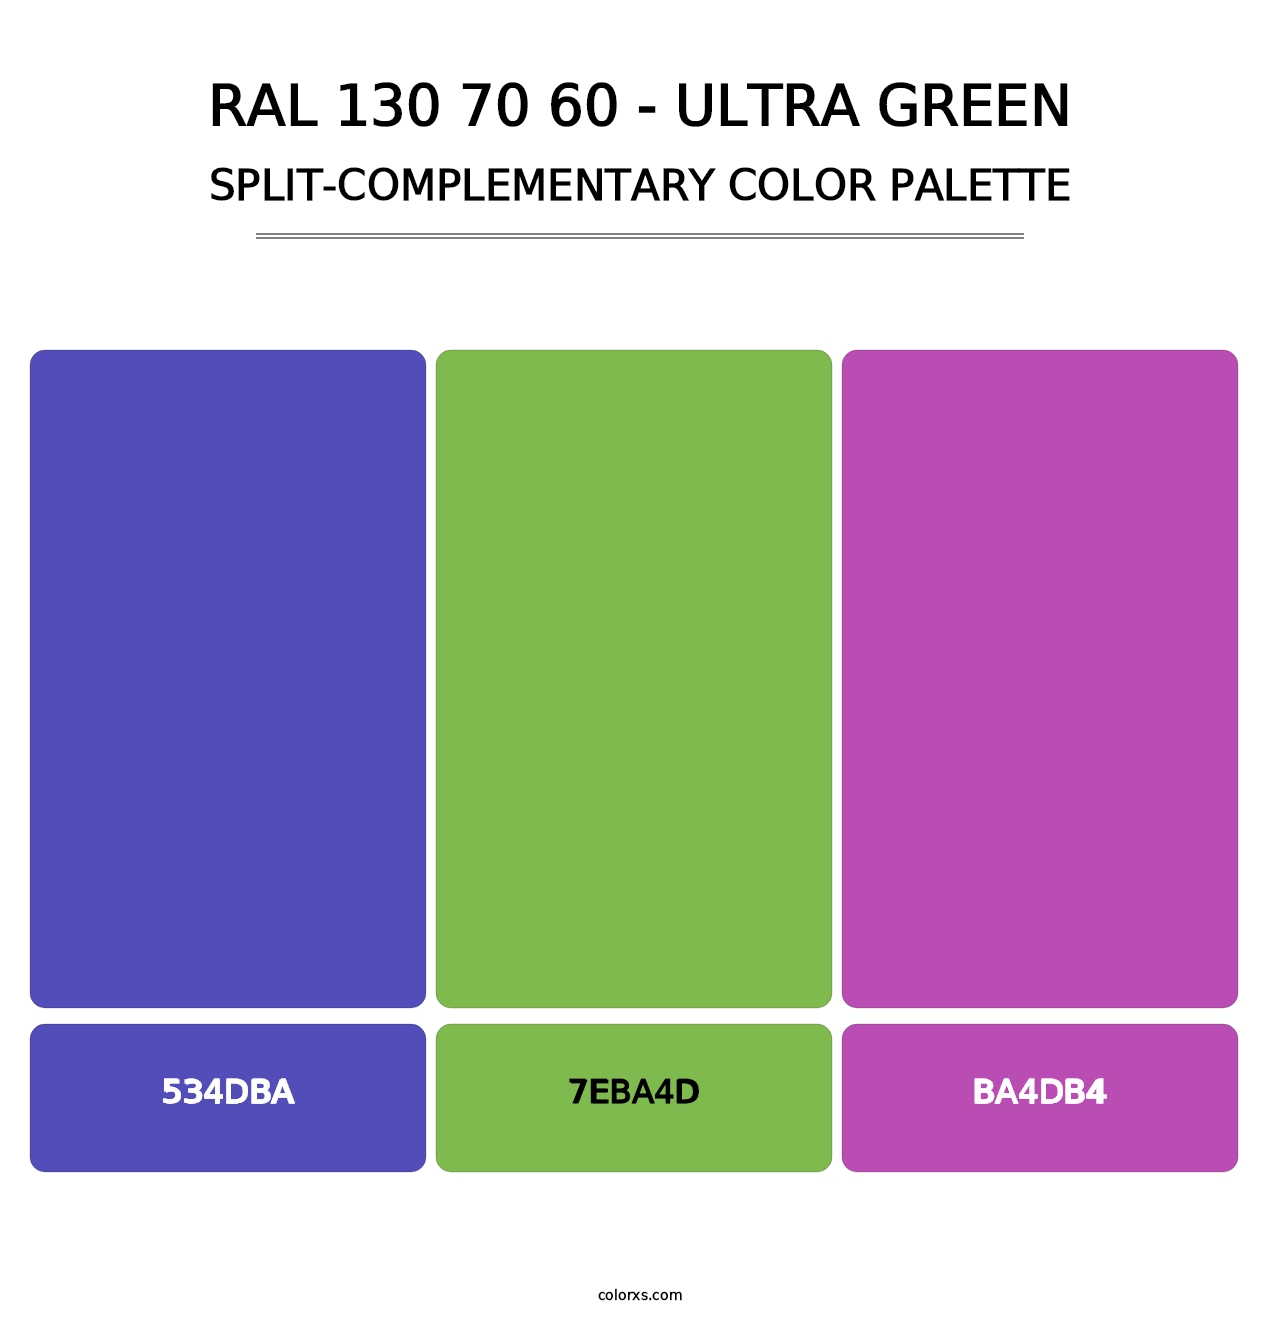 RAL 130 70 60 - Ultra Green - Split-Complementary Color Palette